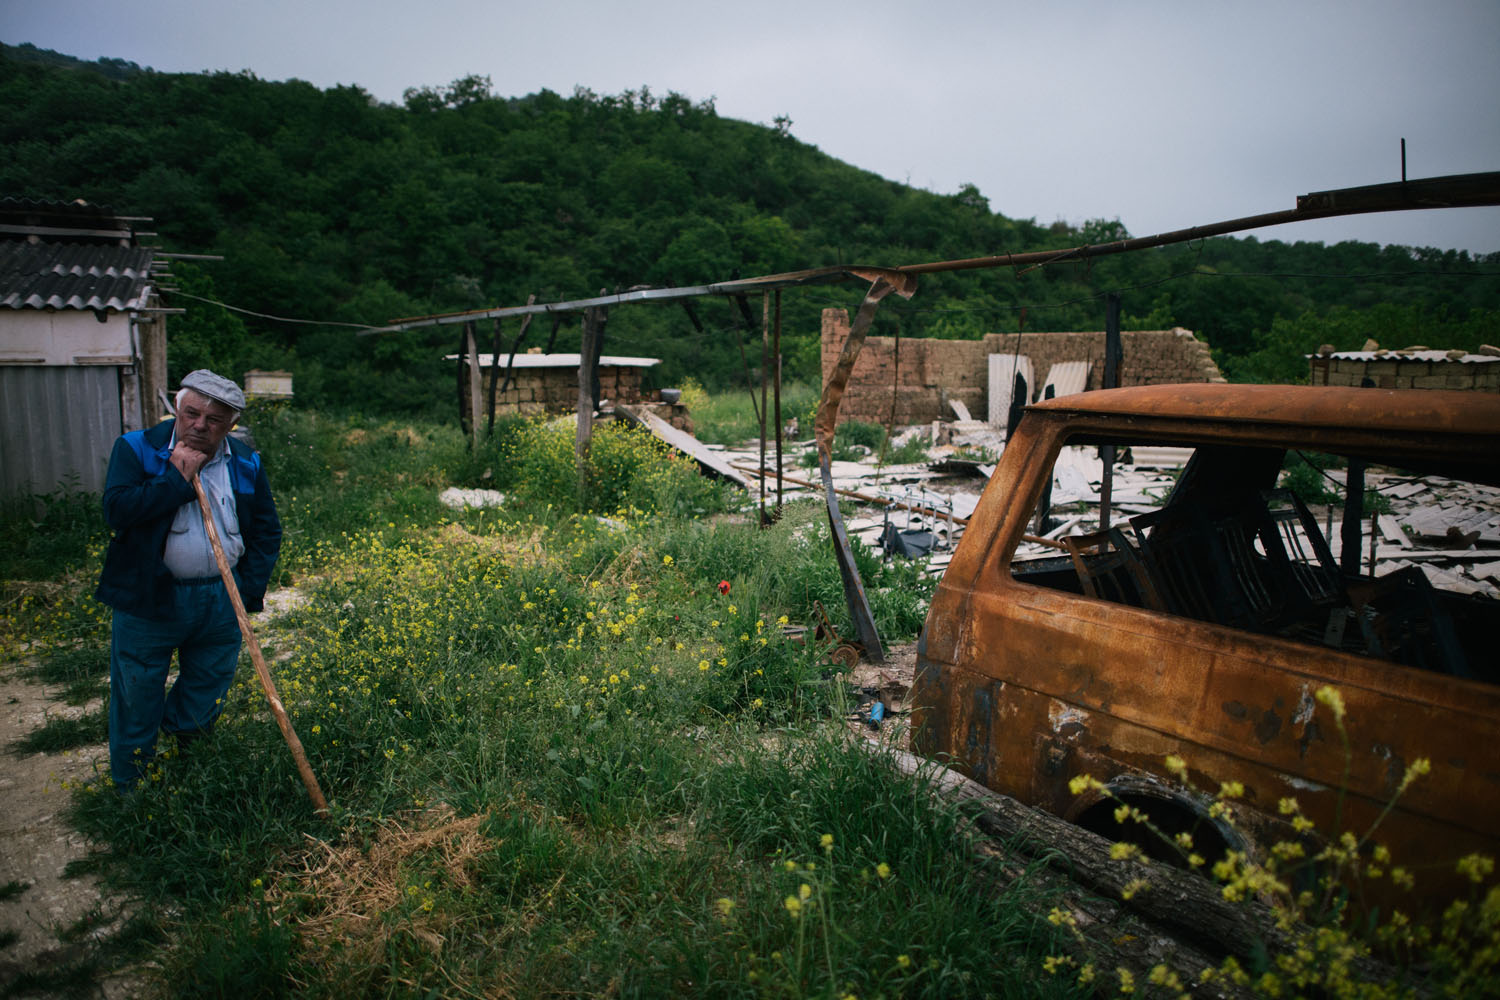 An owner of a farm  where William Plotnikov was killed with his friend stand near burned out buildings destroed during anti-terror operation near village Utamysh, where Plotnikov lived and died